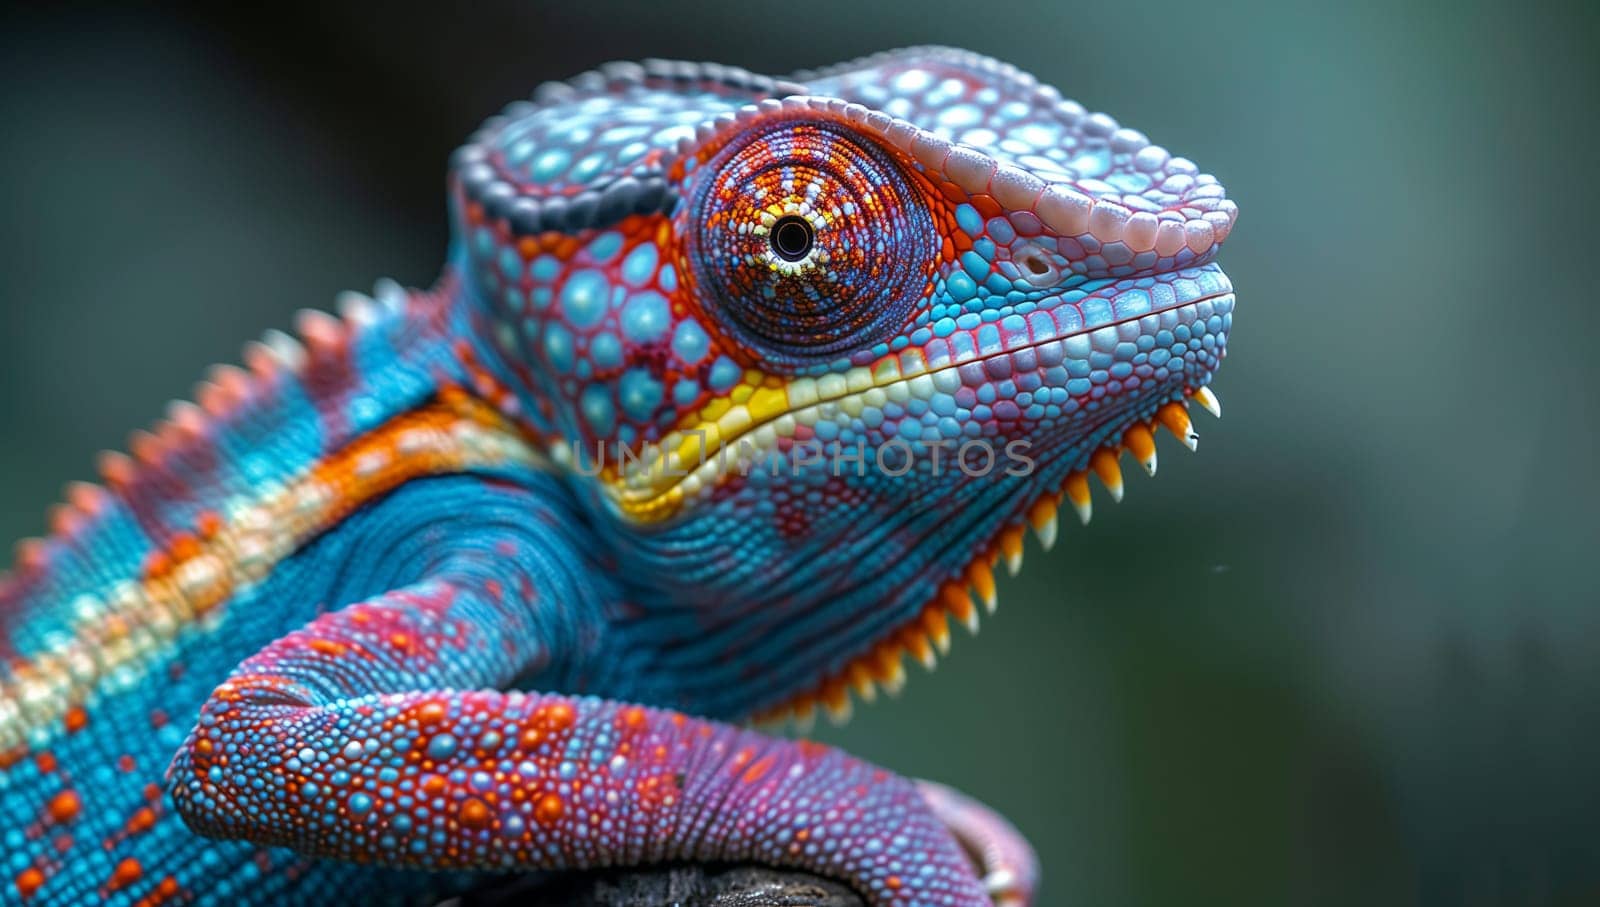 A colorful chameleon, a scaled reptile and terrestrial animal, is perched on a rock, its electric blue eye staring directly at the camera in a closeup wildlife shot